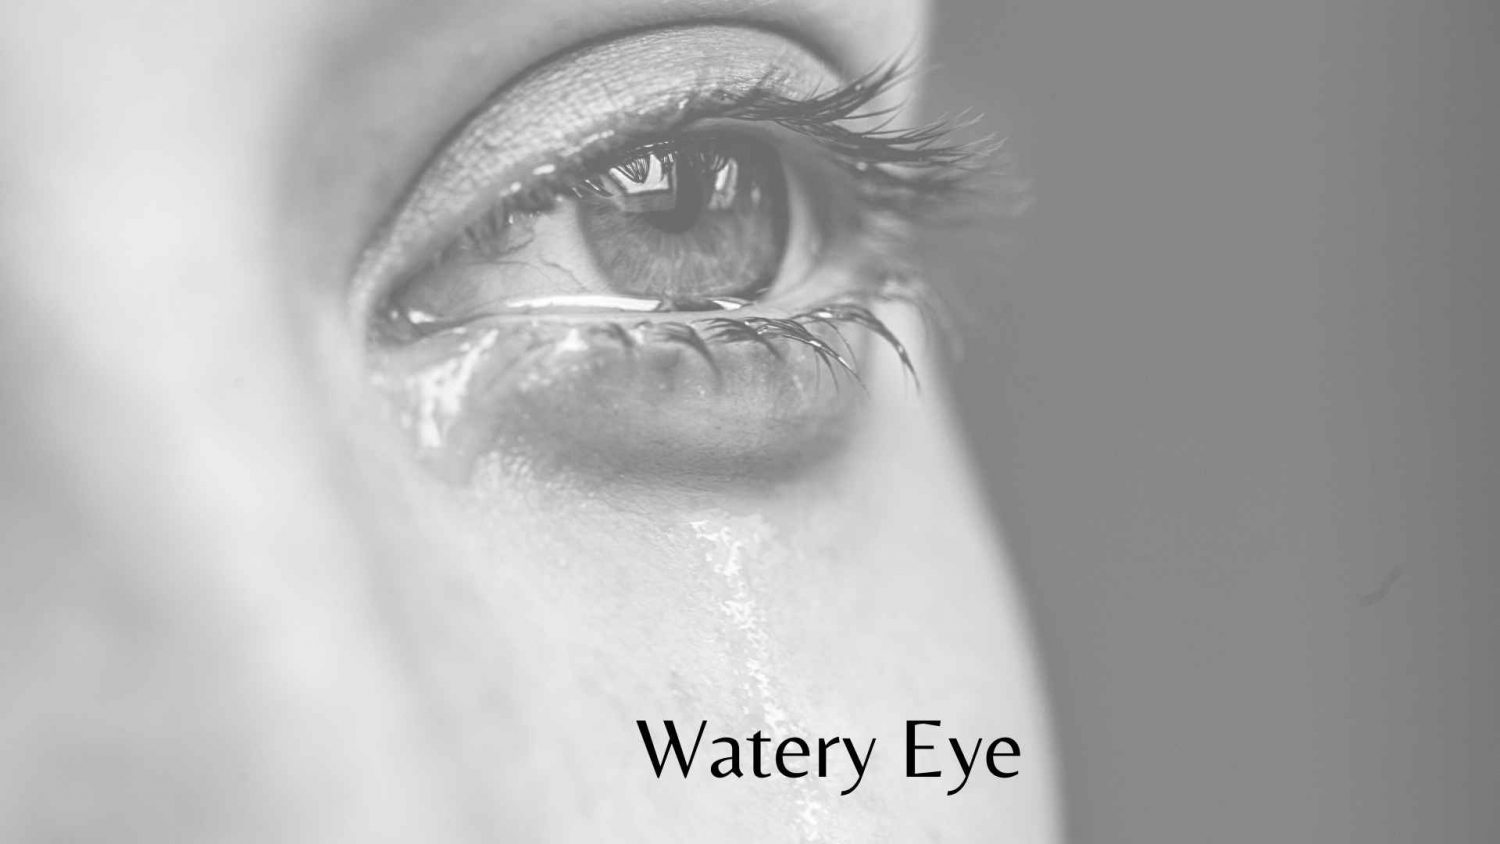 Watery eye. water streaming down the face from the eye